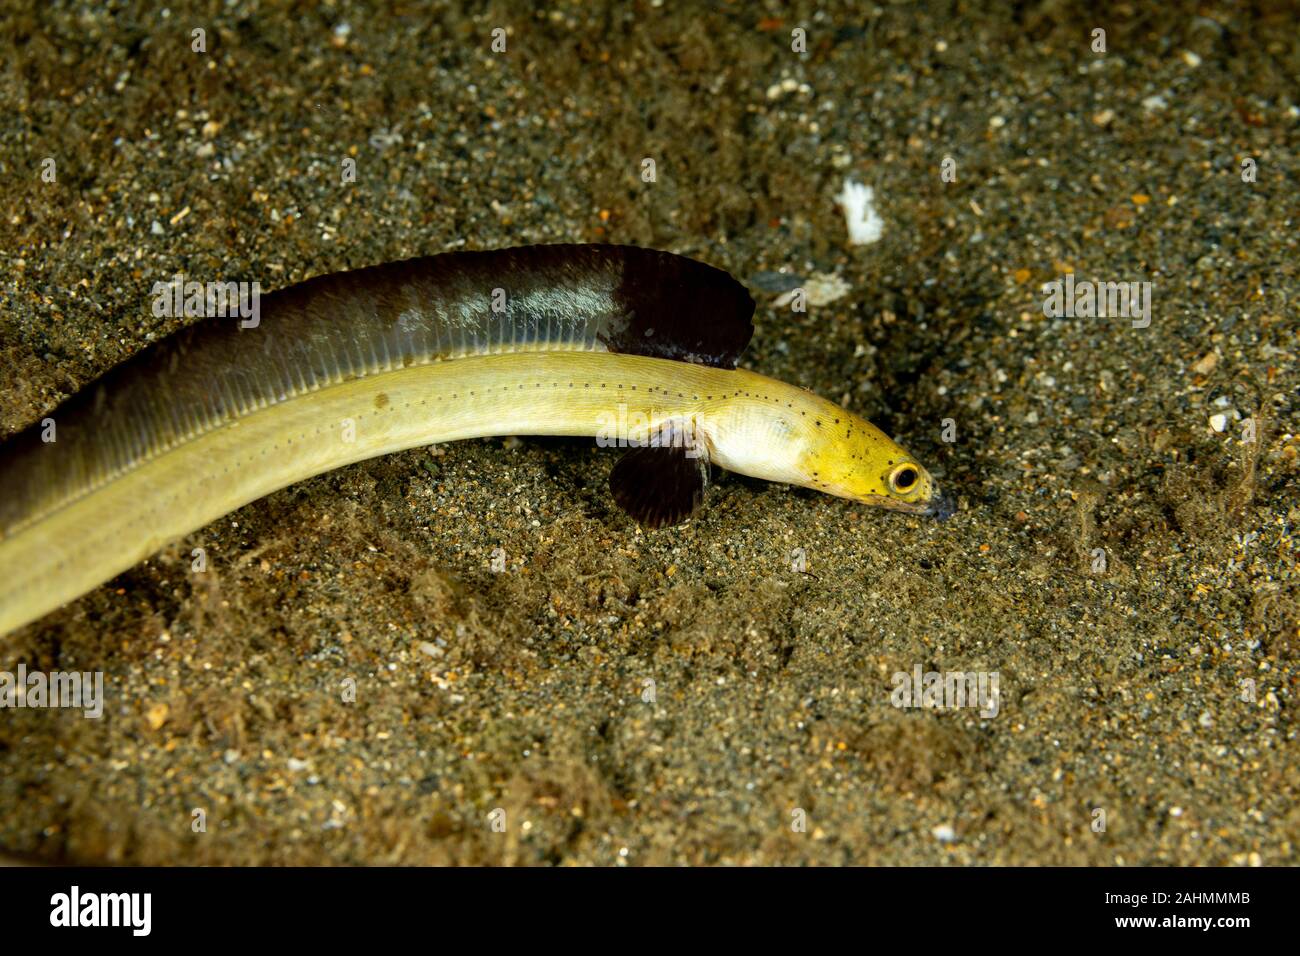 Longfin snake eel, Pisodonophis cancrivorus, is an eel in the family Ophichthidae worm/snake eels Stock Photo